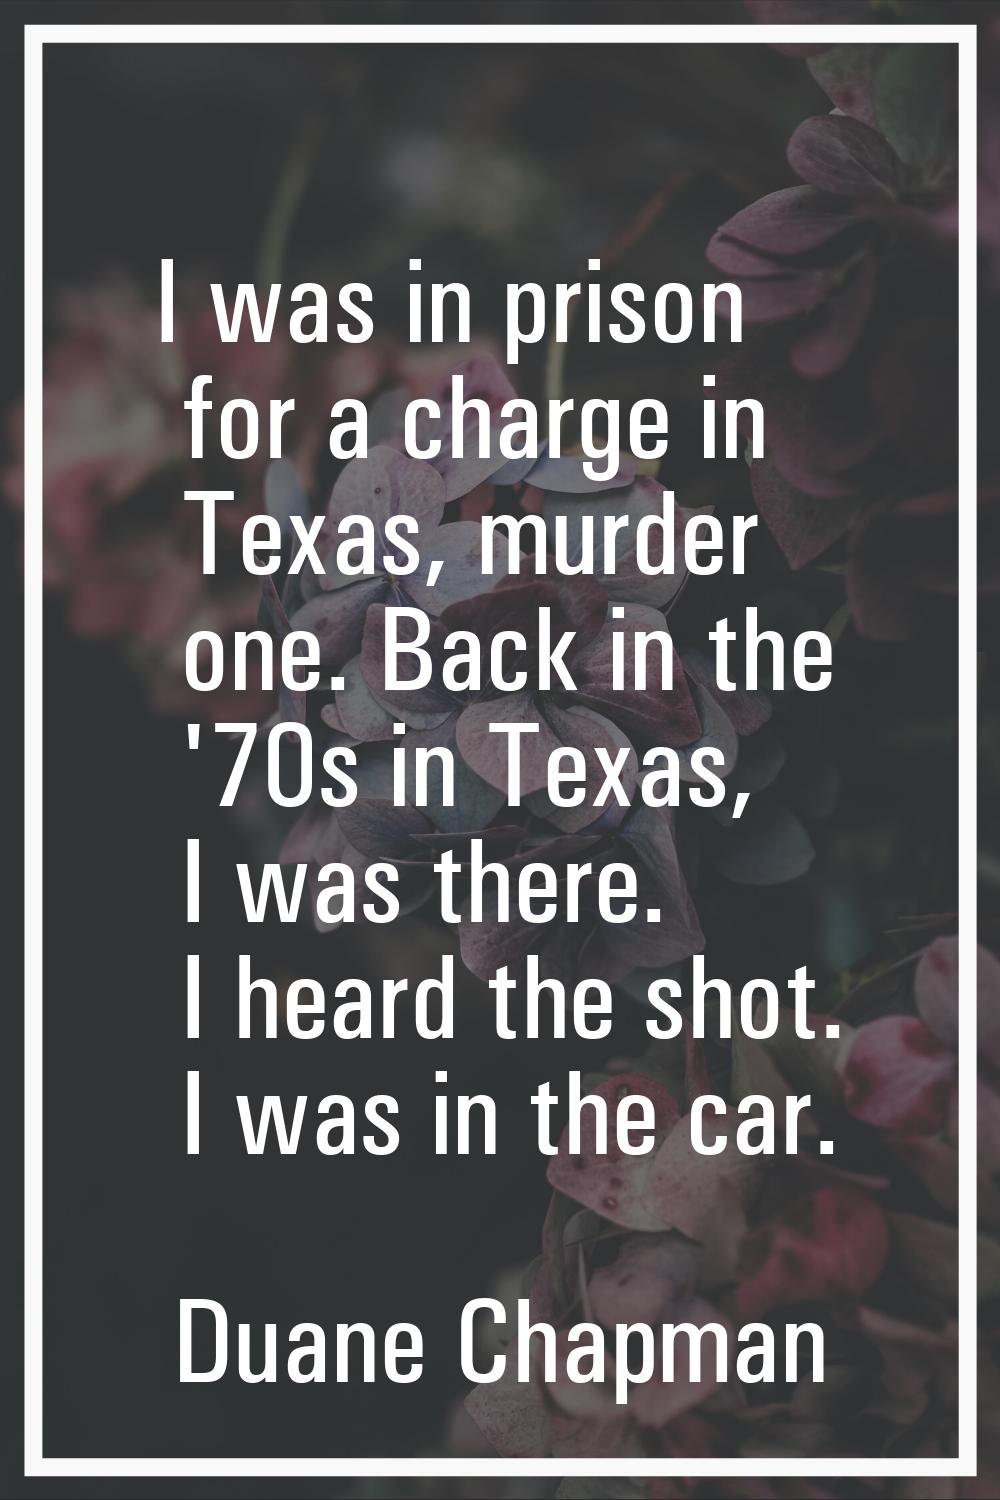 I was in prison for a charge in Texas, murder one. Back in the '70s in Texas, I was there. I heard 